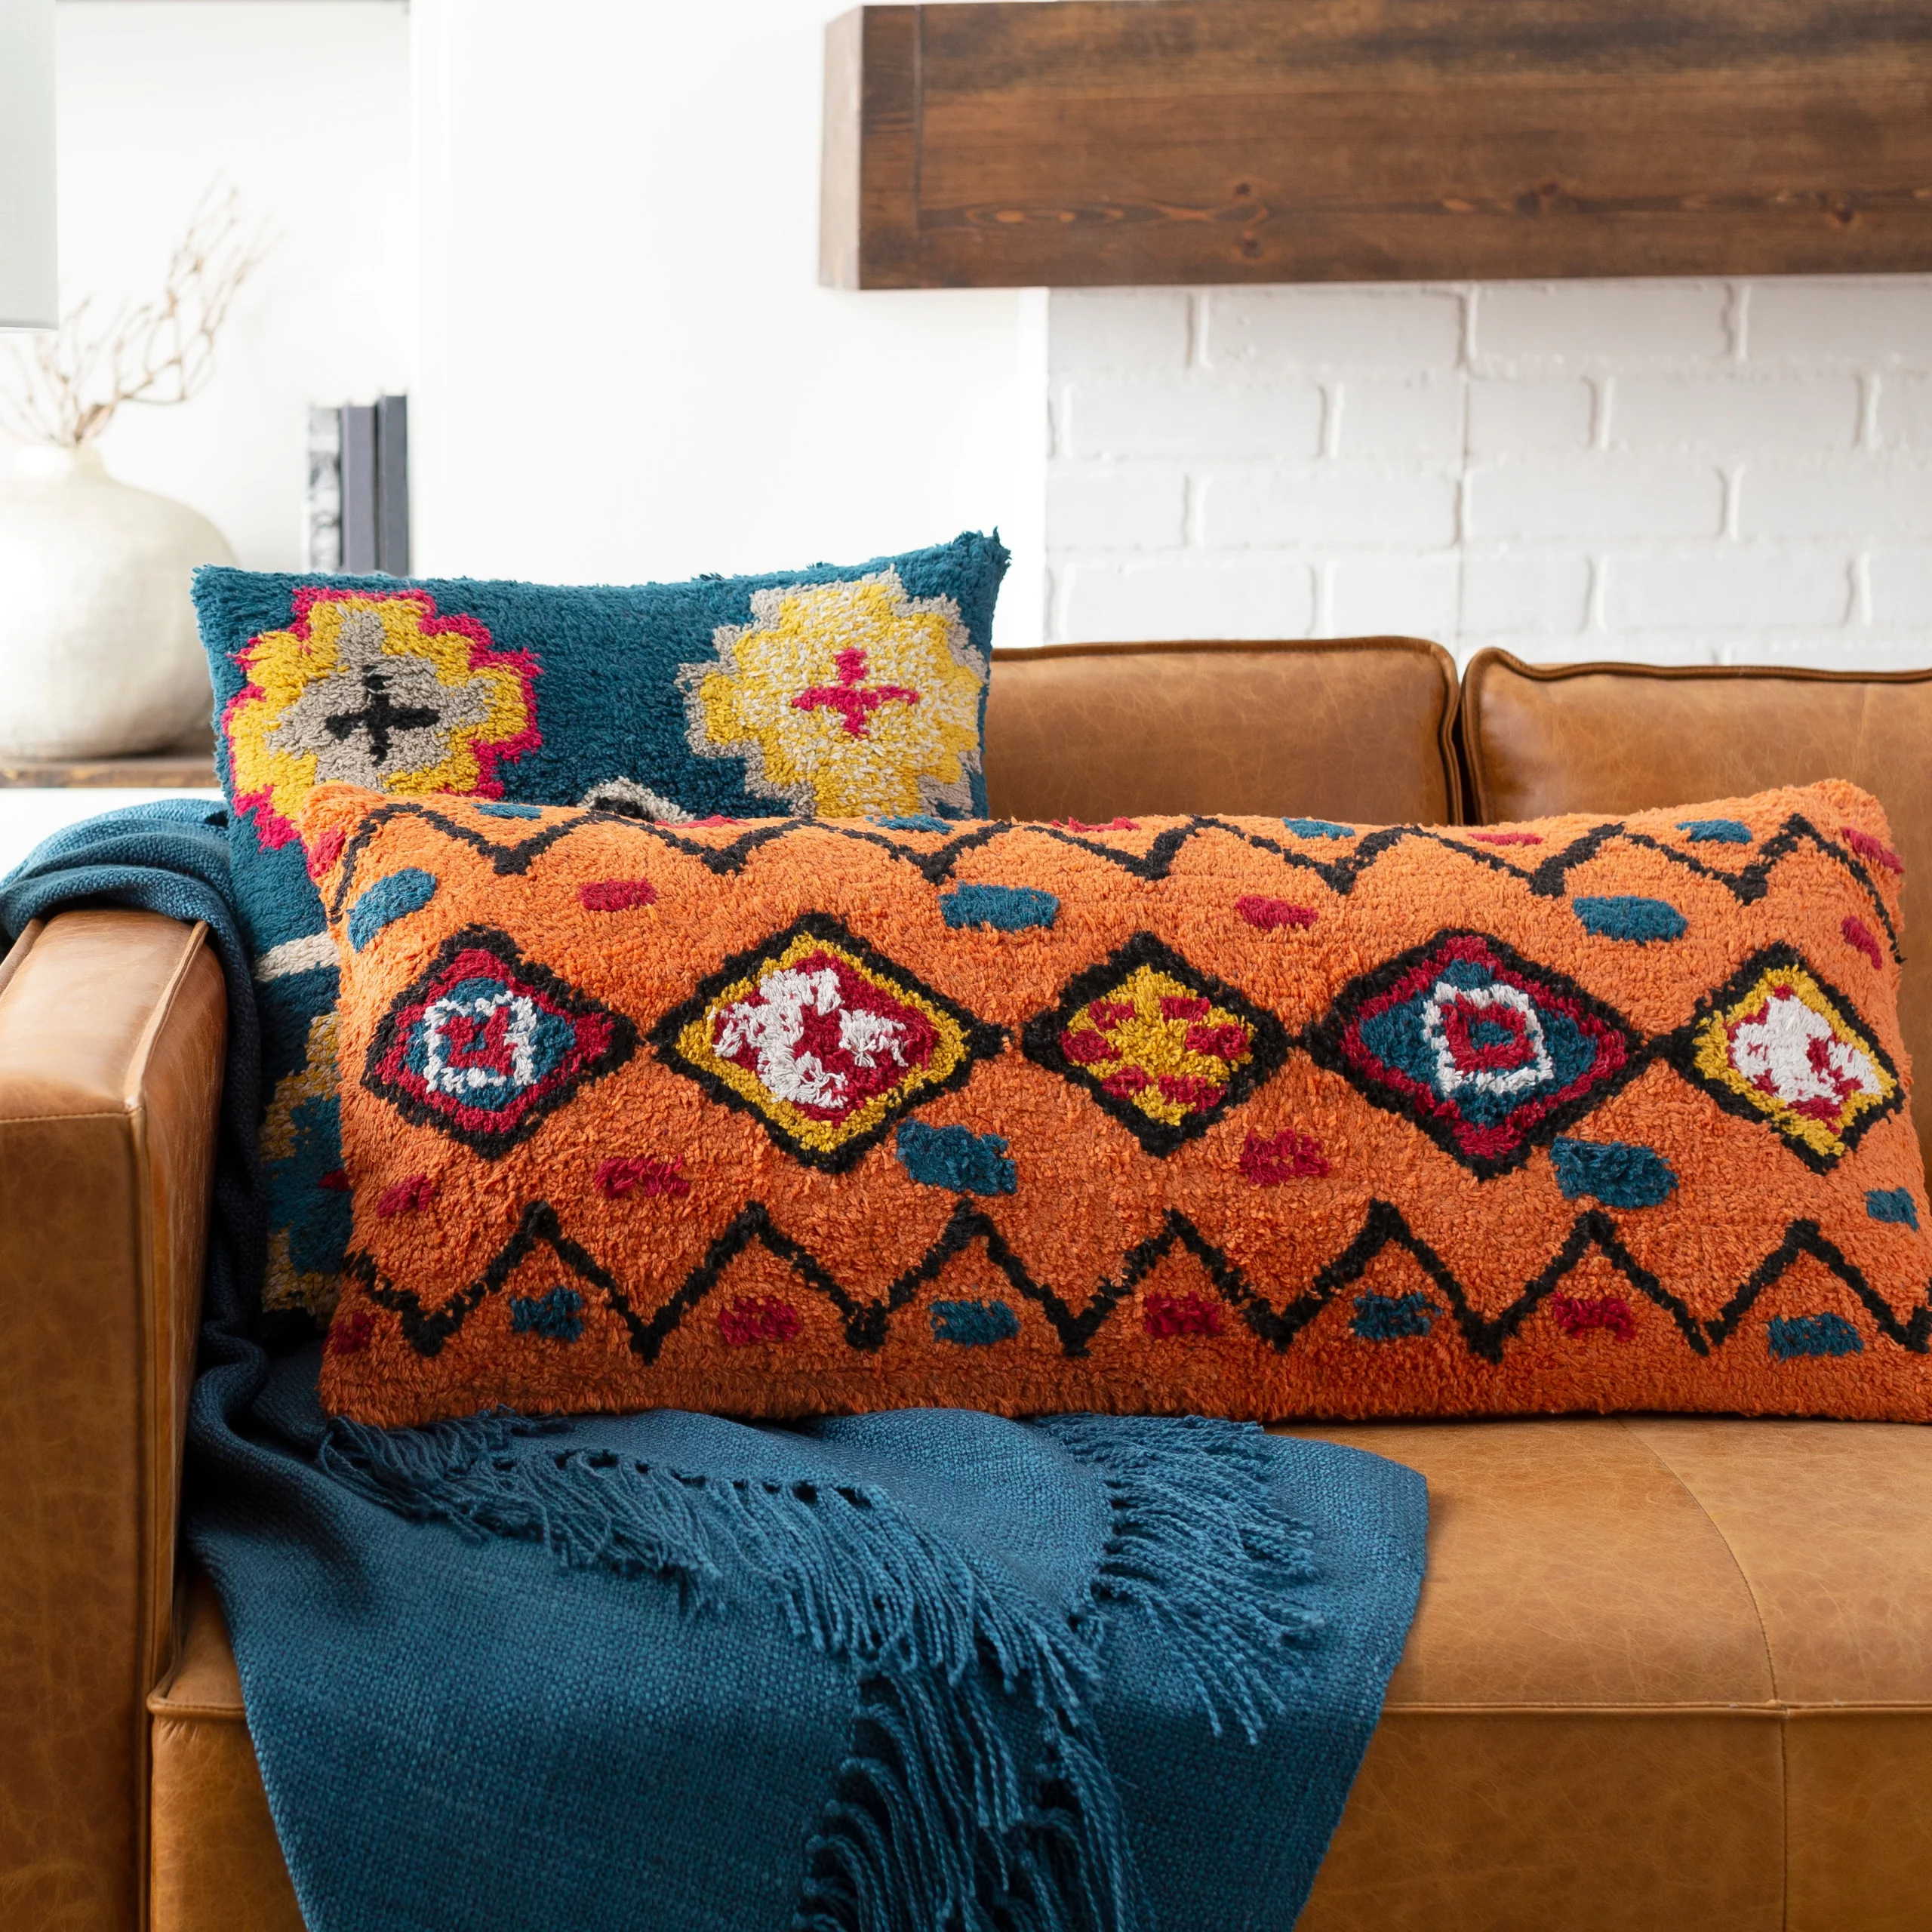 Bright and Oversized Boho Throw Pillow for a Fun Look